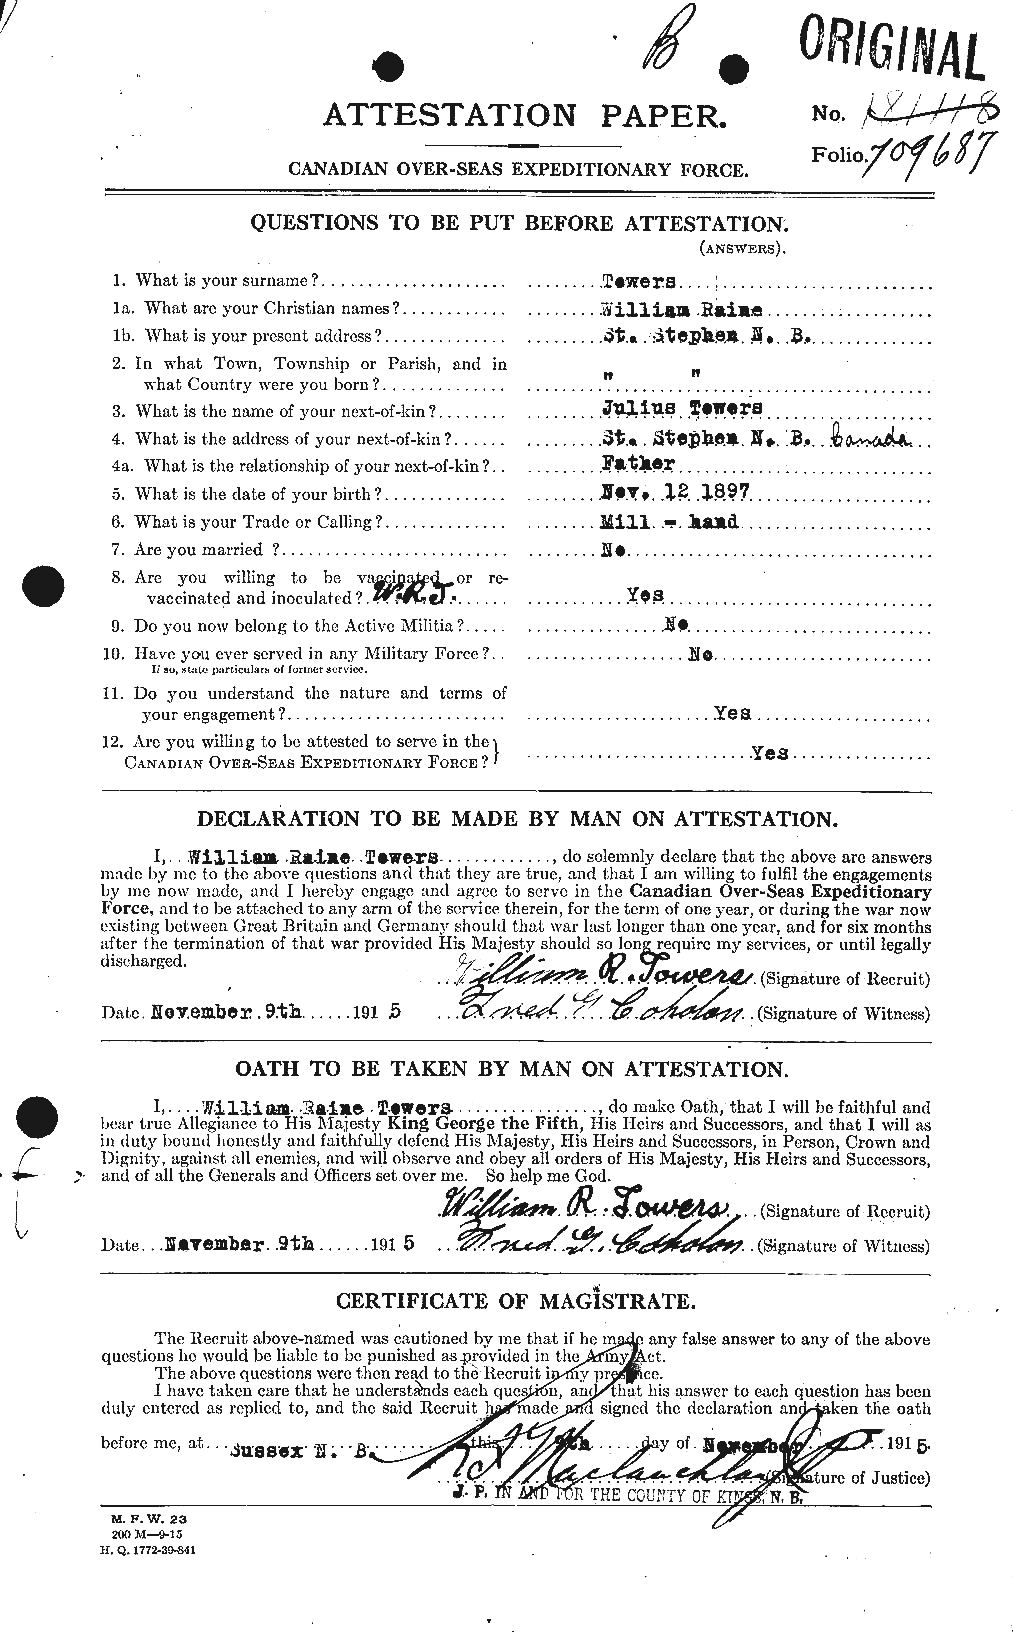 Personnel Records of the First World War - CEF 636241a